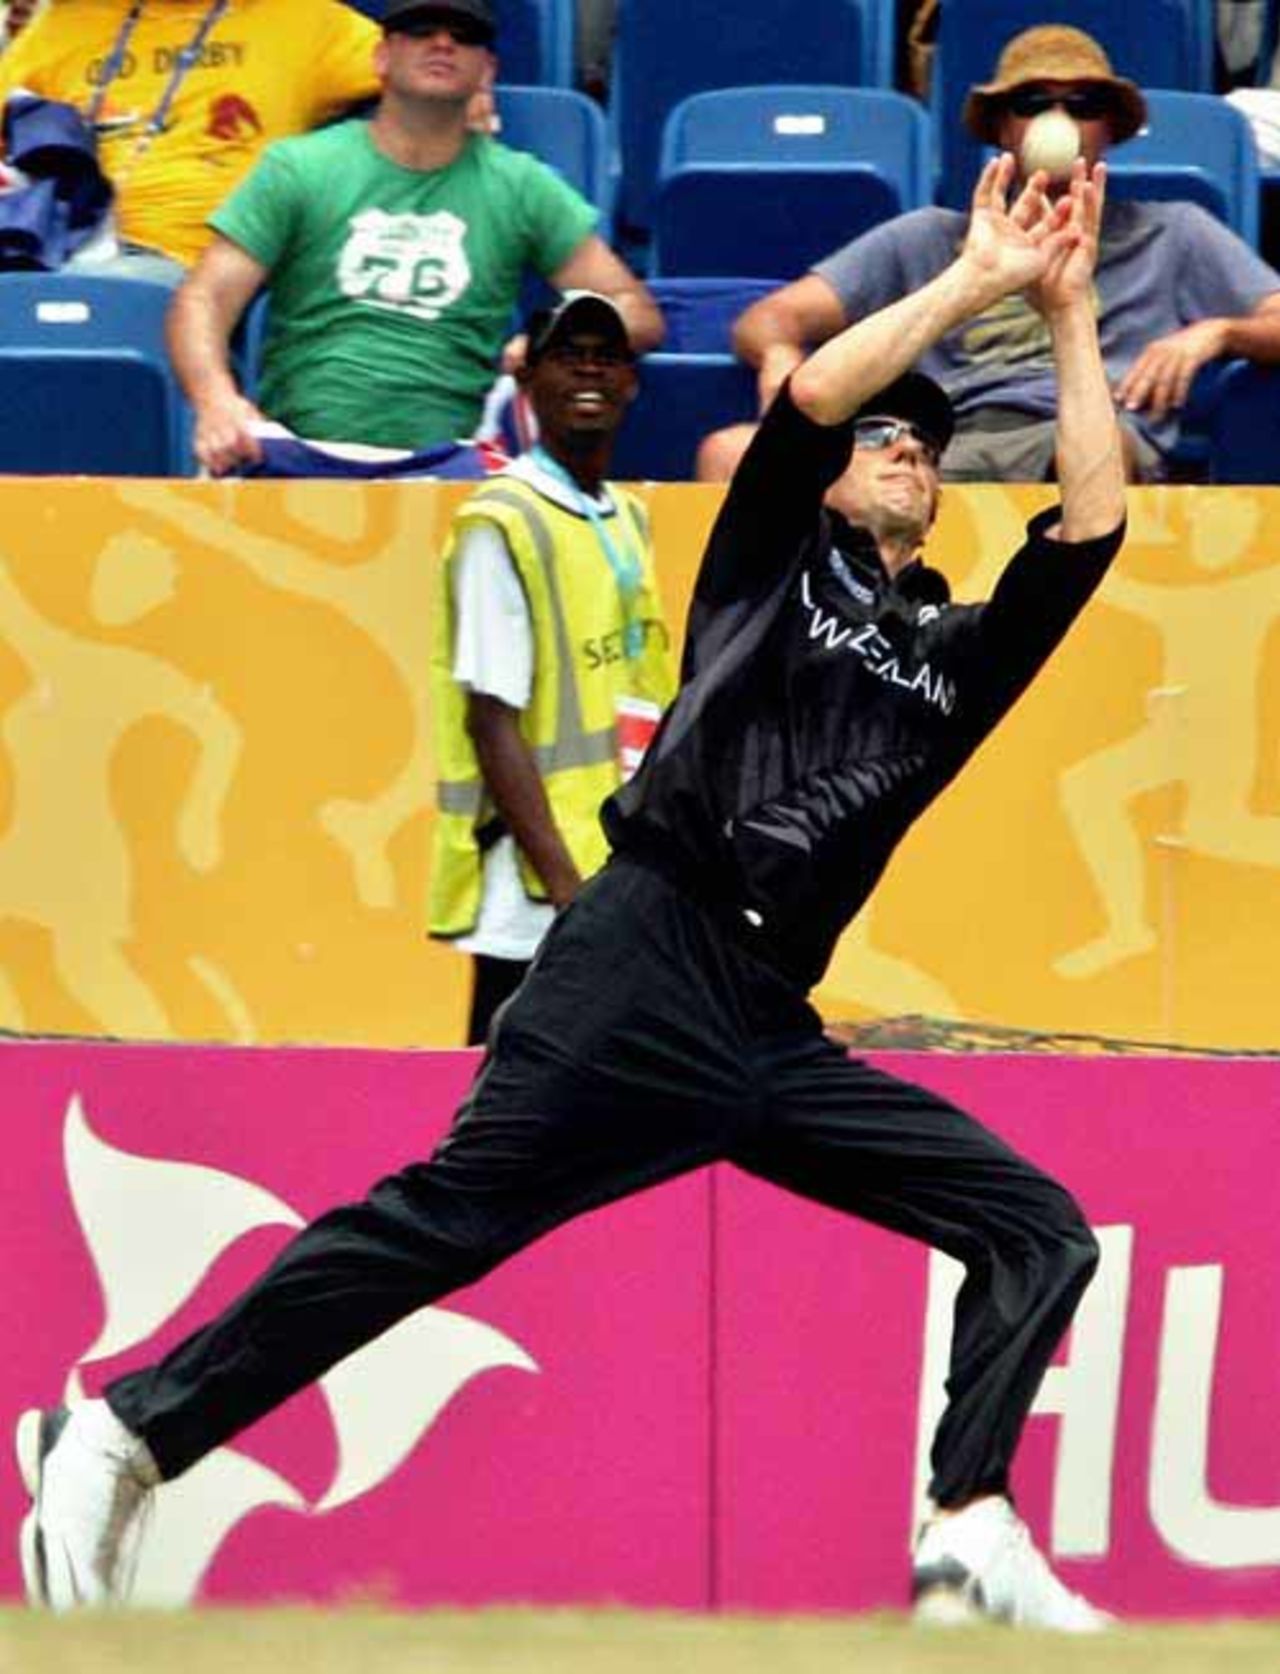 Michael Mason successfully takes a catch to dismiss  Andrew Symonds, Australia v New Zealand, Super Eights, Grenada, April 20, 2007 